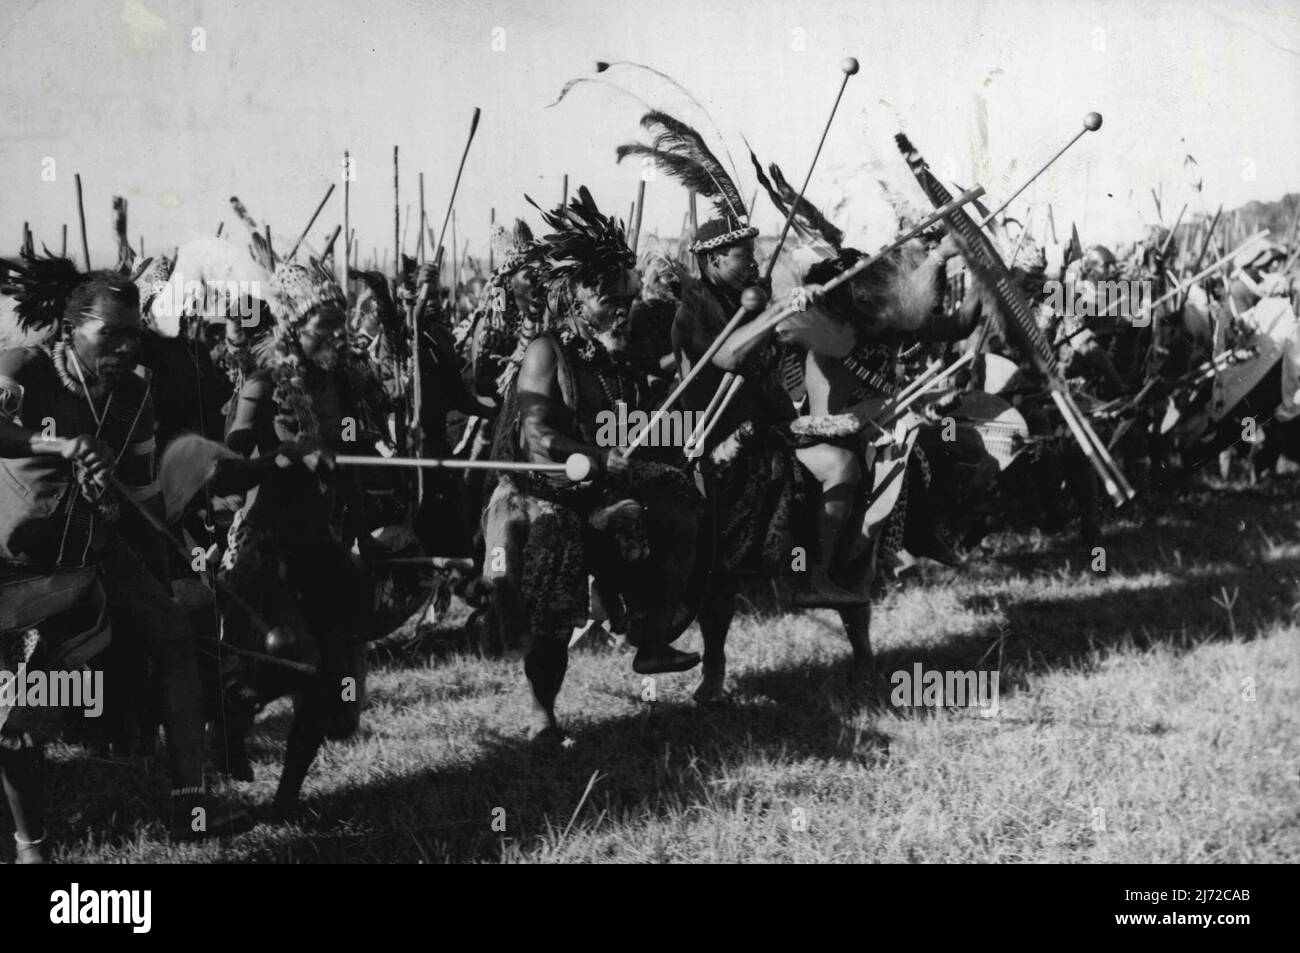 Zulus Dance Before The King And Queen -- Zulu men and women advancing towards the royal dais as they performed their ceremonial war dance before the King and Queen. 50,000 natives, from the remotest parts of the Zululand territory, gathered at Eshowe, Zululand, to pay homage to the King and Queen. 5000 men and women in plumed head-dresses and ox-skin kilts, complete with shield and assegai, performed their ceremonial war dance. March 24, 1947. Stock Photo